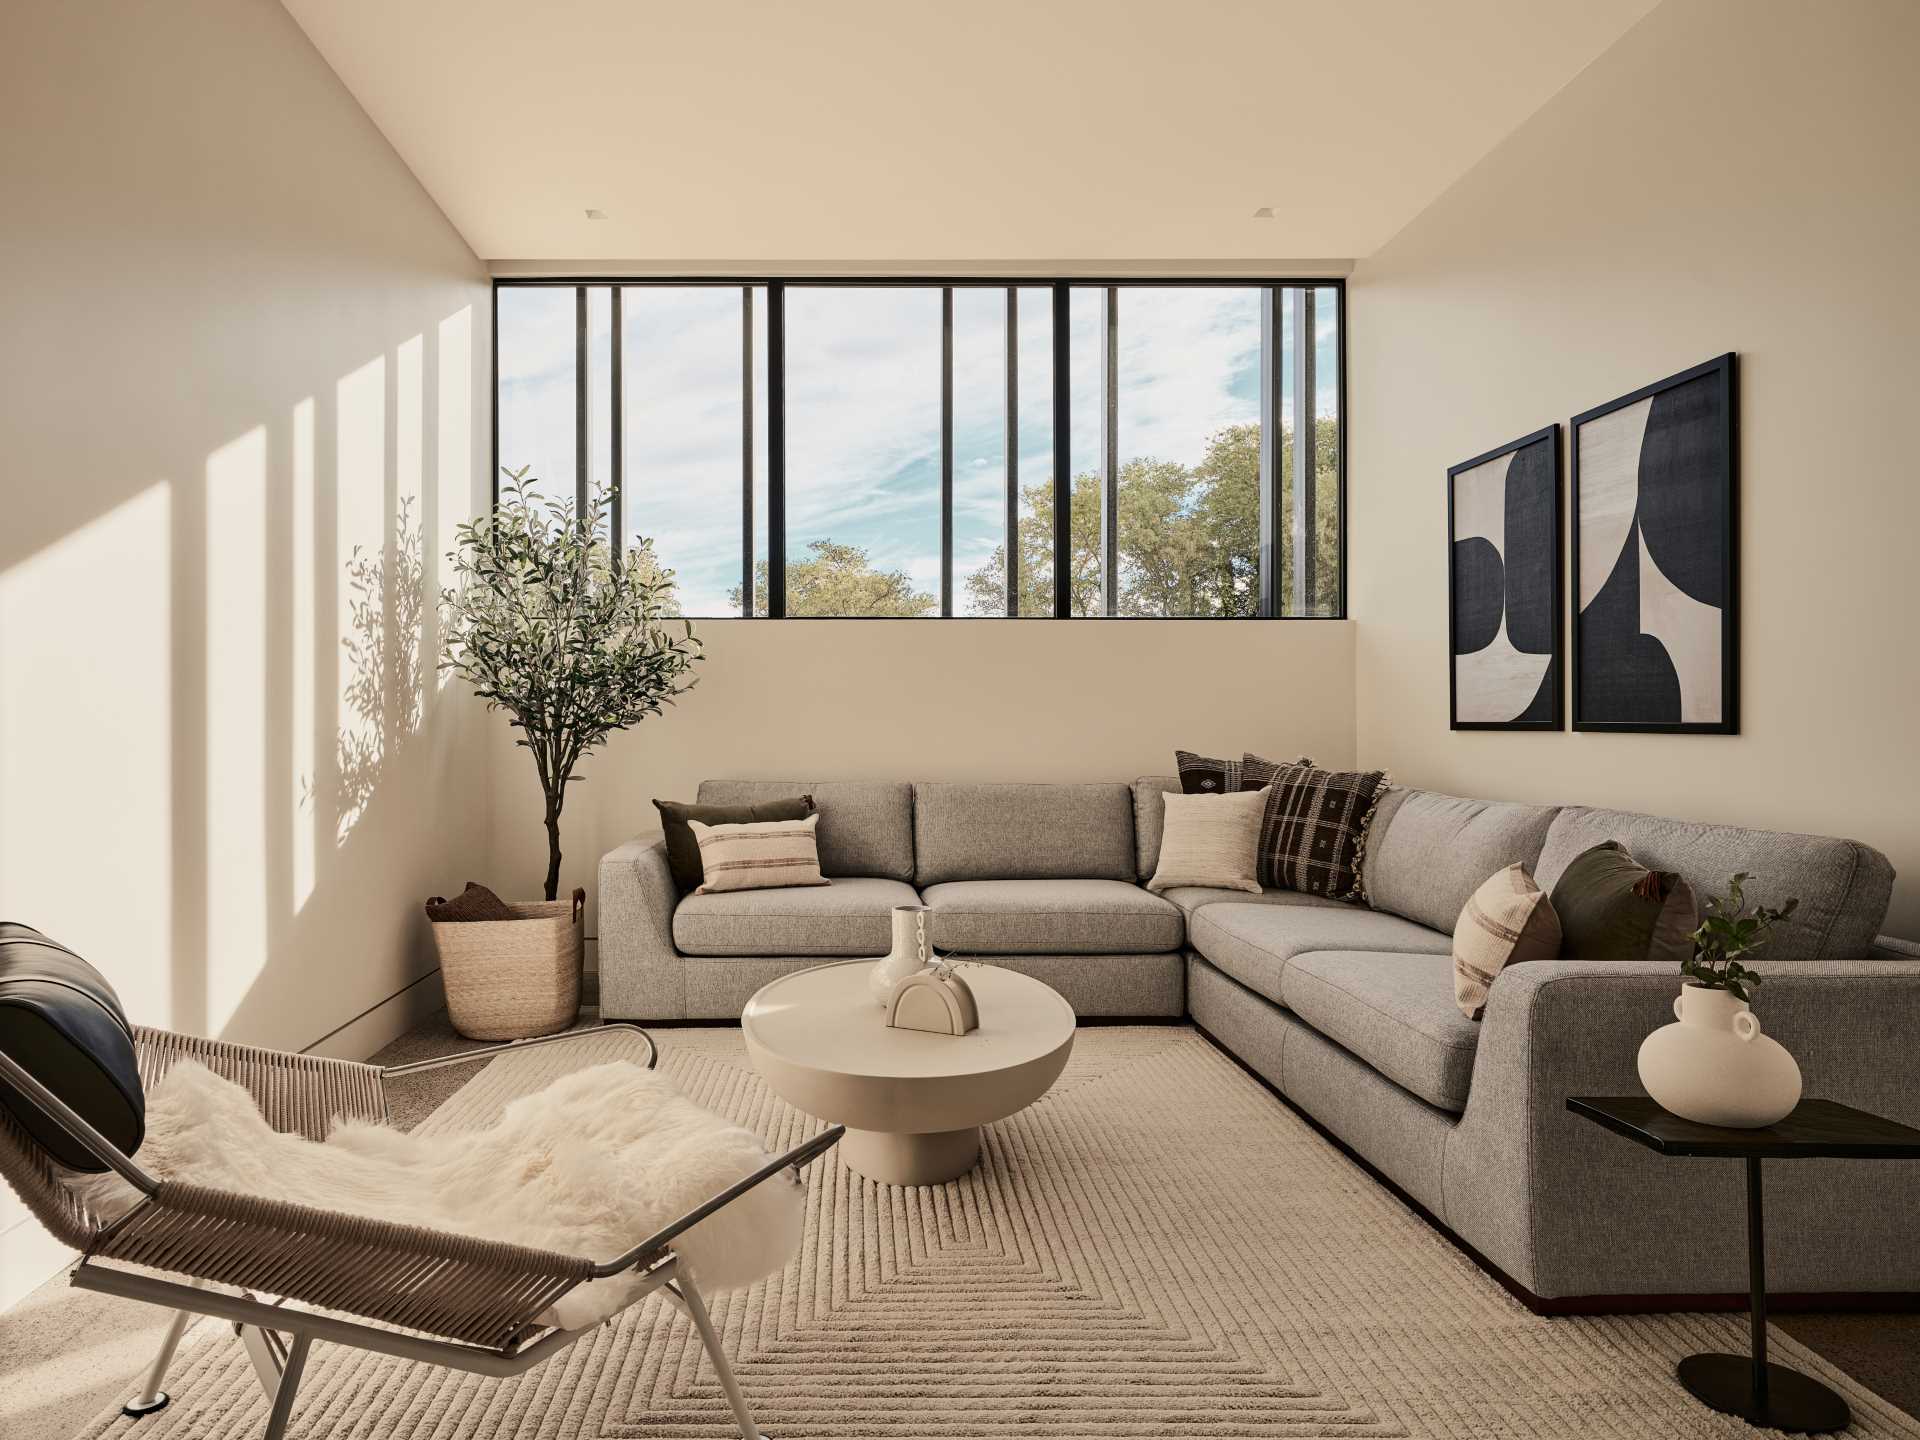 A contemporary living room filled with neutral colors.